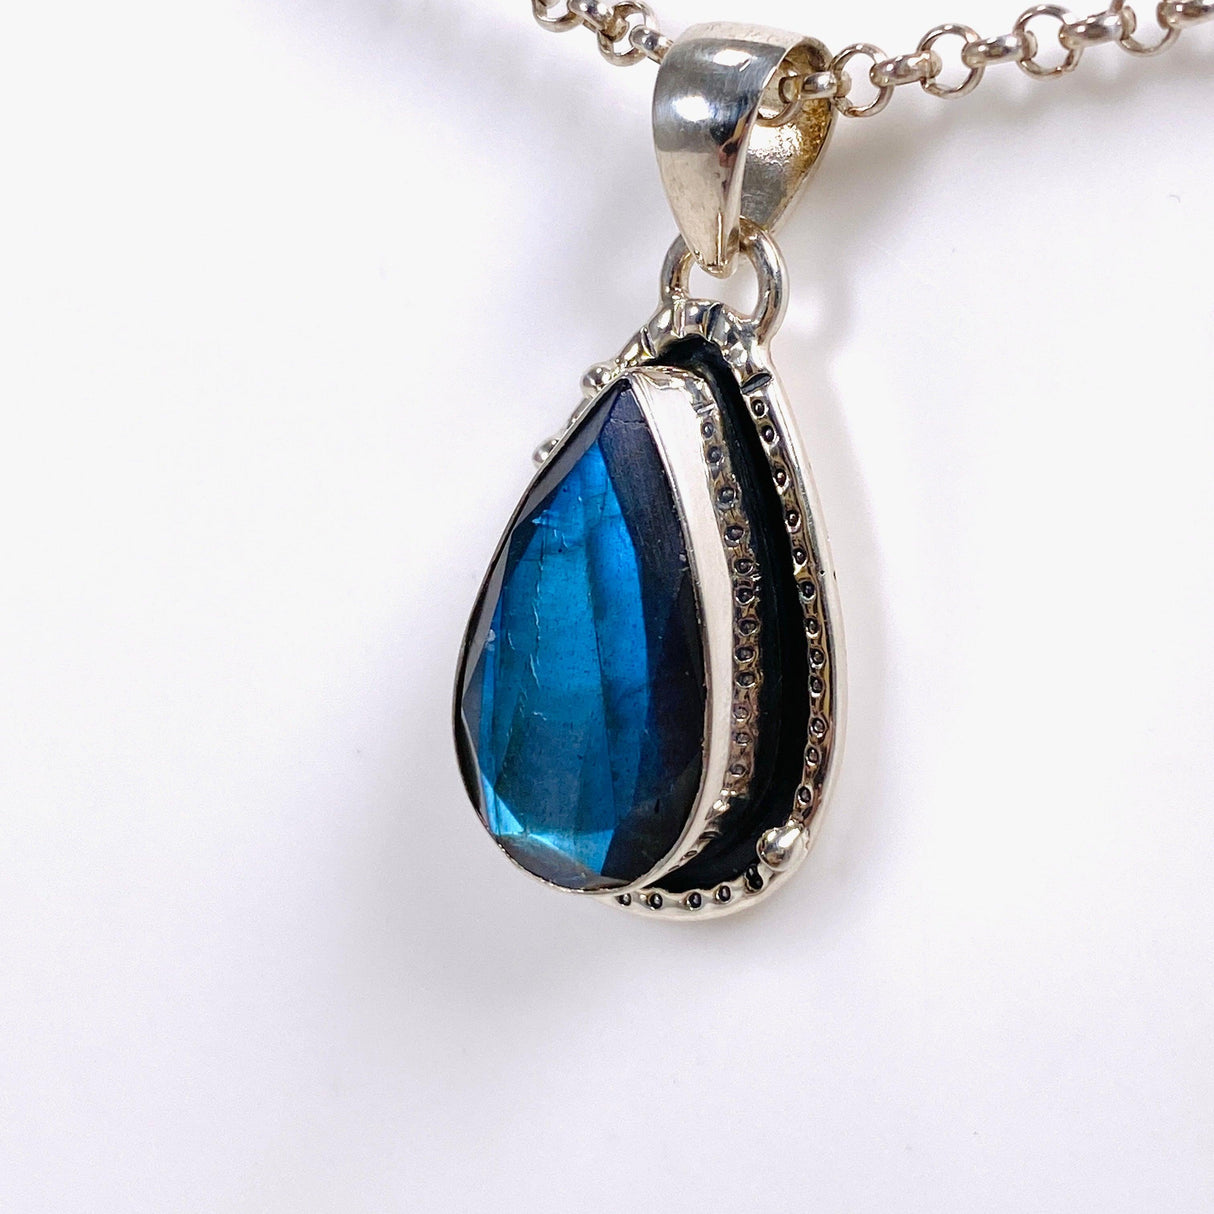 Blue iridescent Labradorite faceted gemstone pendant set in silver on a silver belcher chain